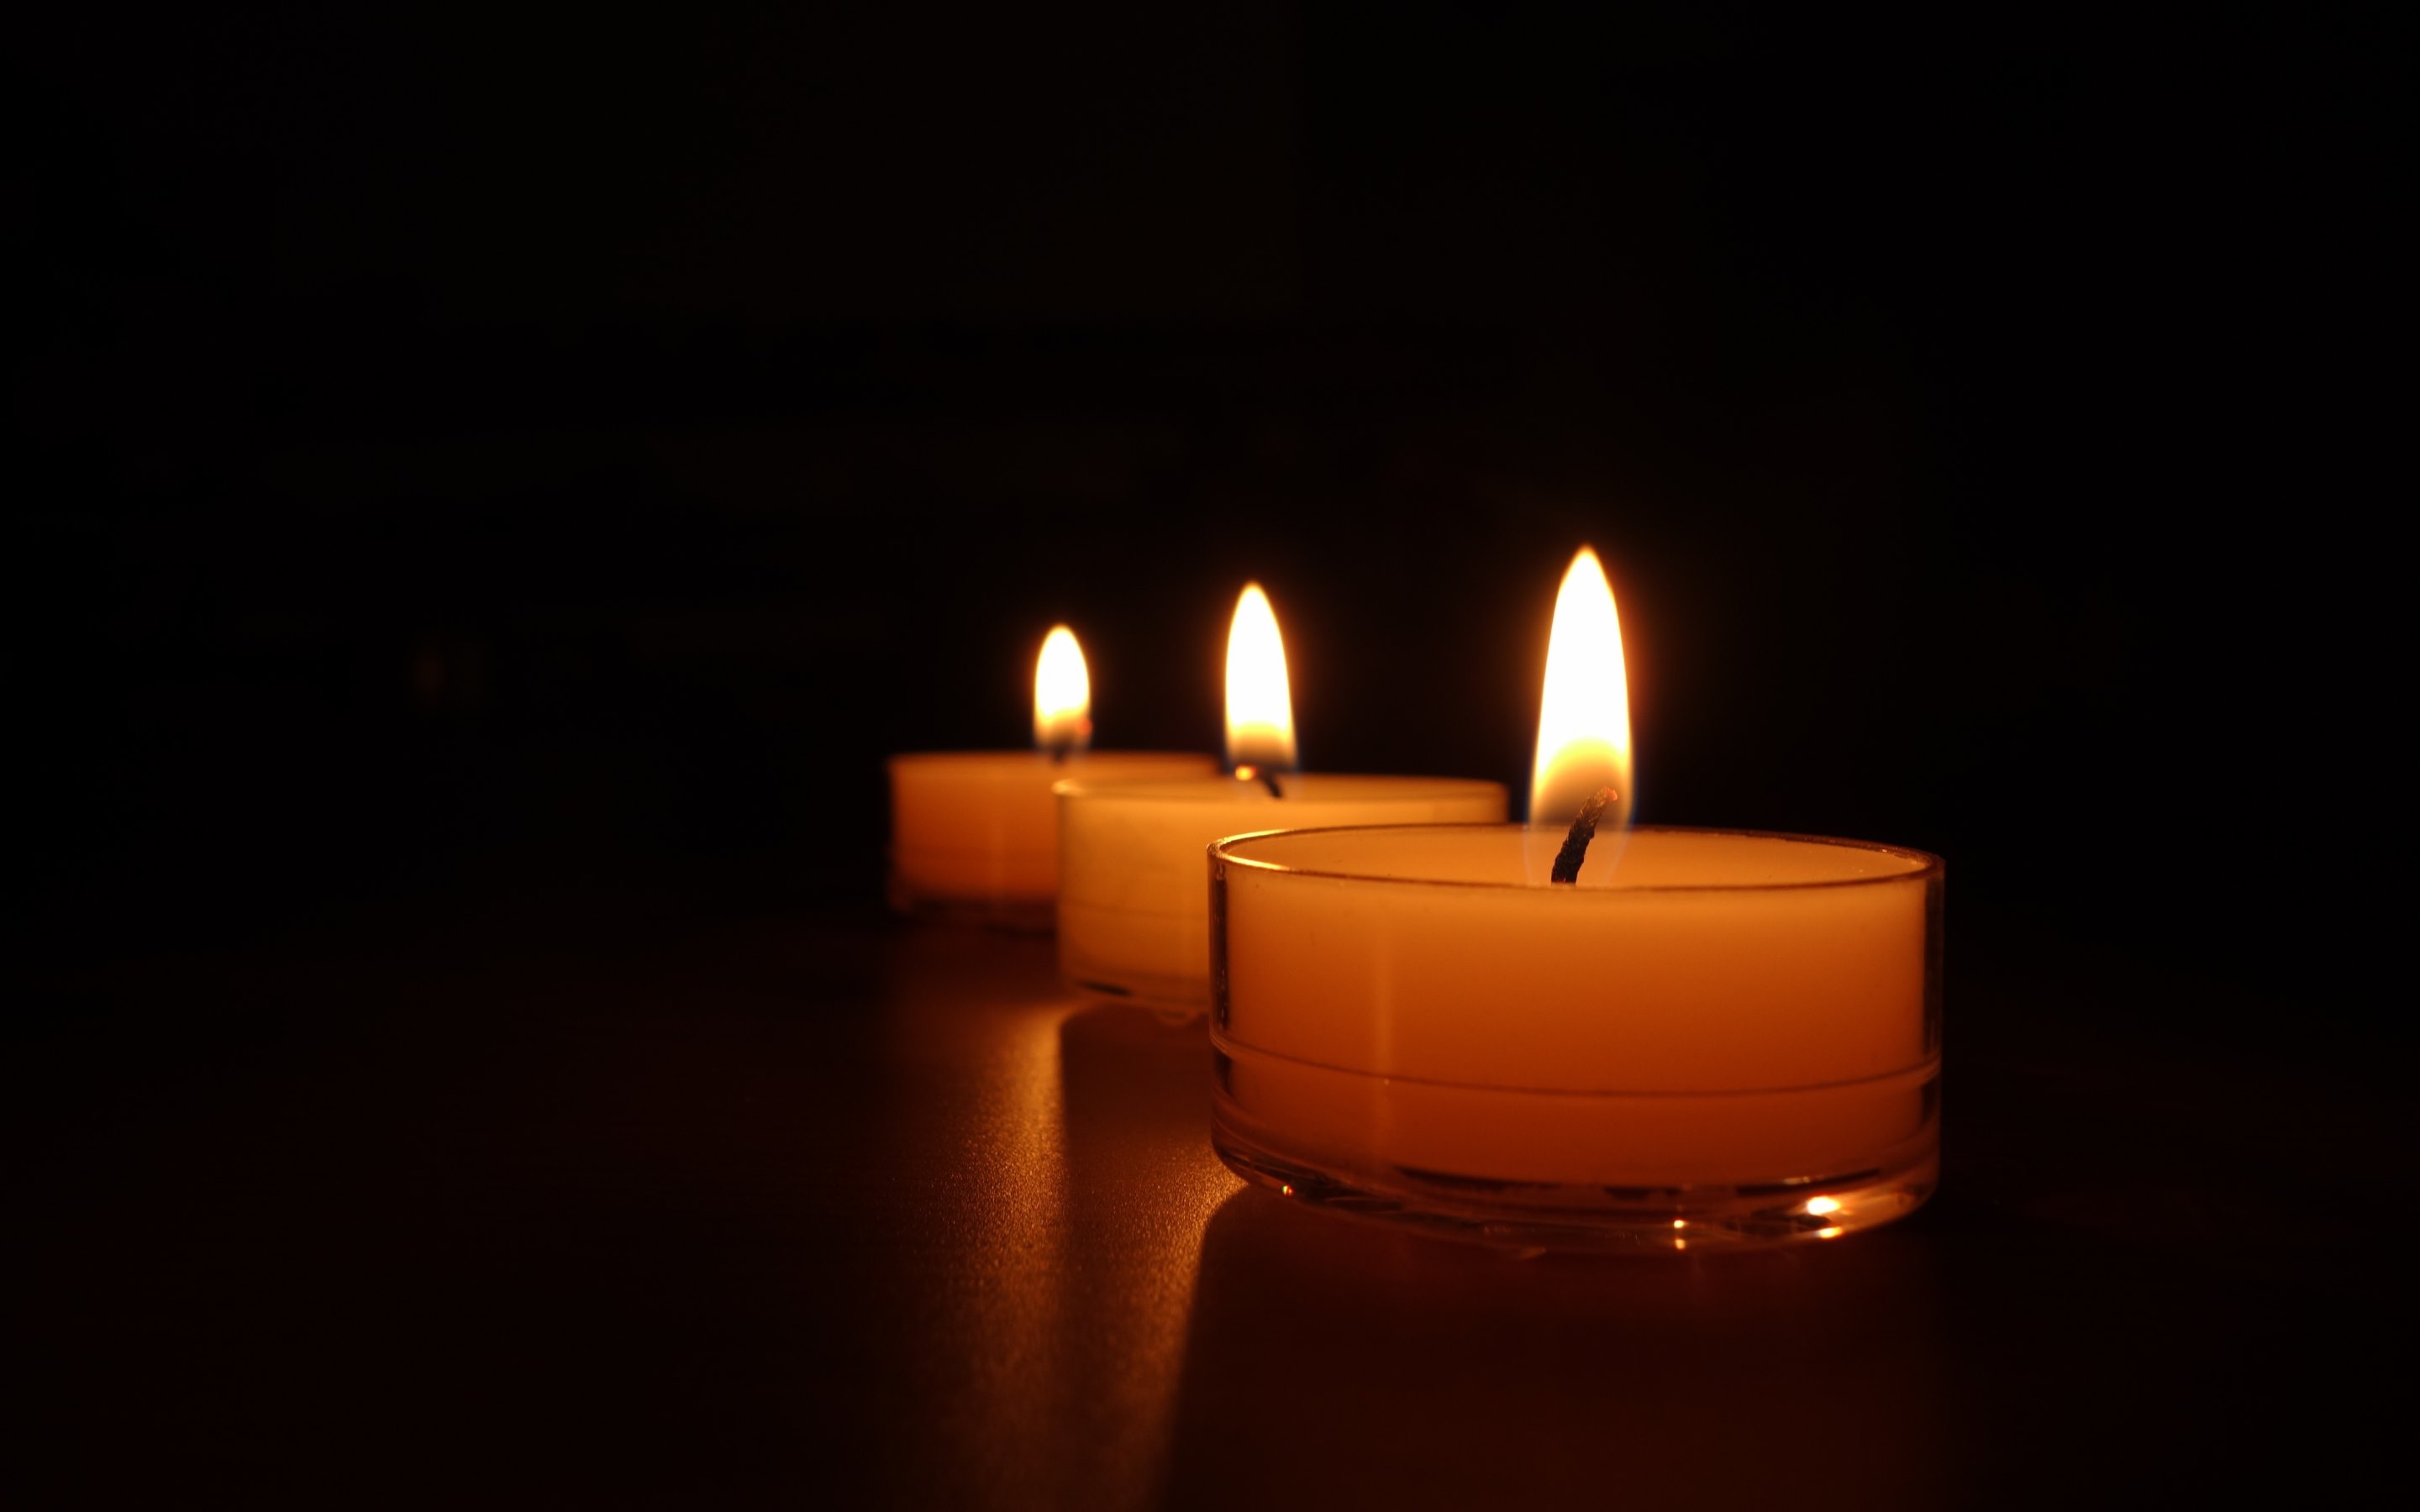 4K Candles Wallpapers High Quality | Download Free